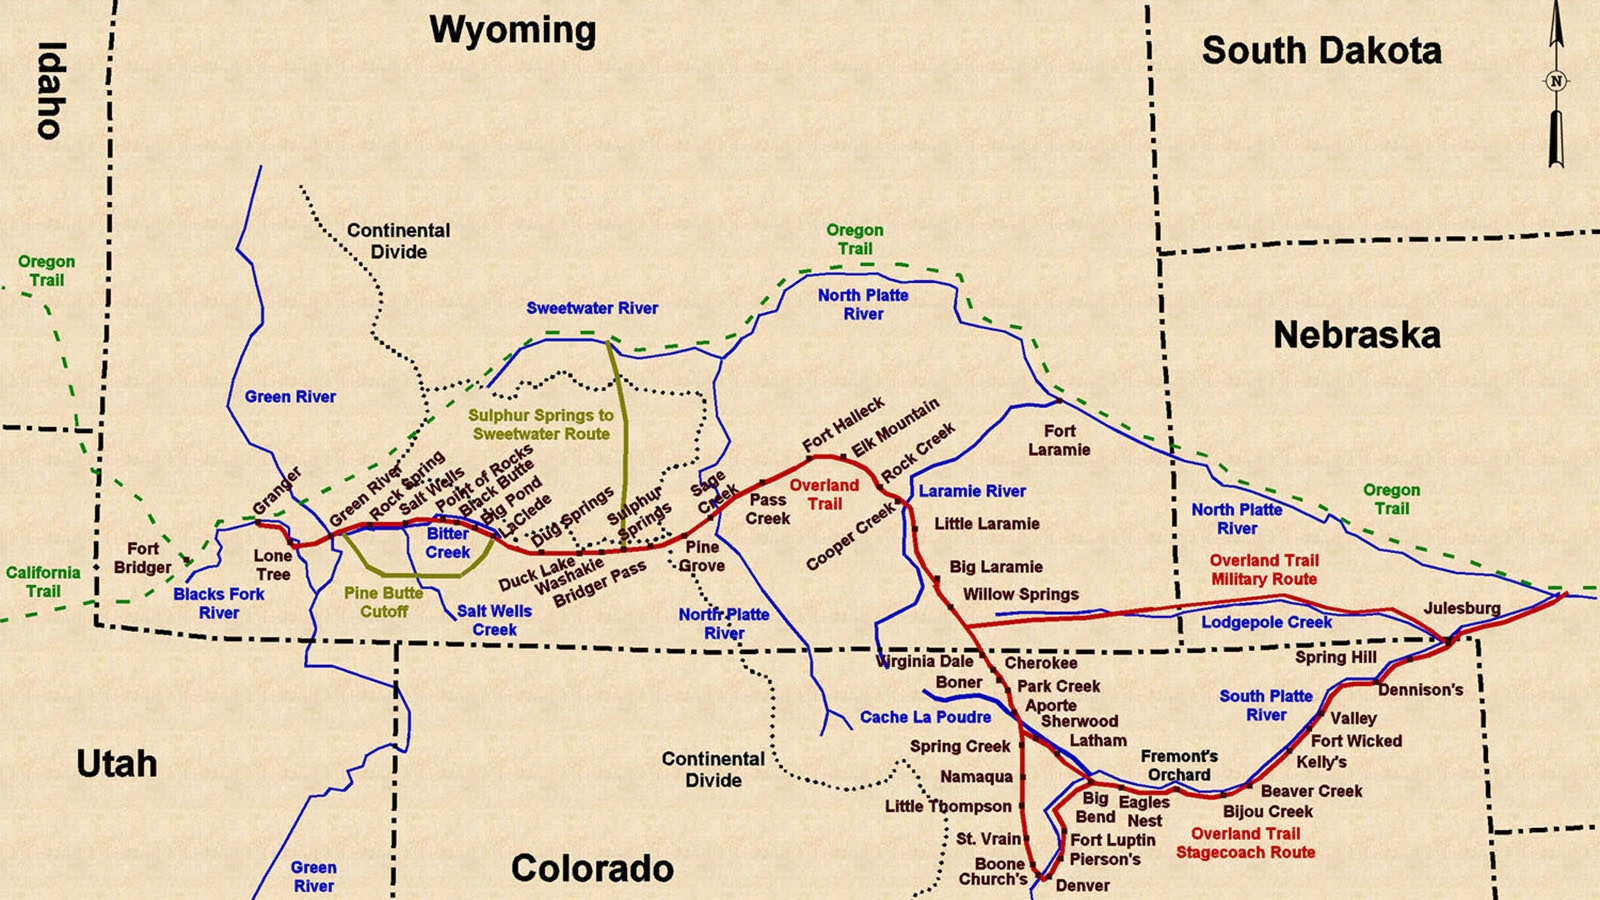 This map shows all the overland trails, stage routes and Pony Express route across Wyoming and the region, all converging at Granger, far left.